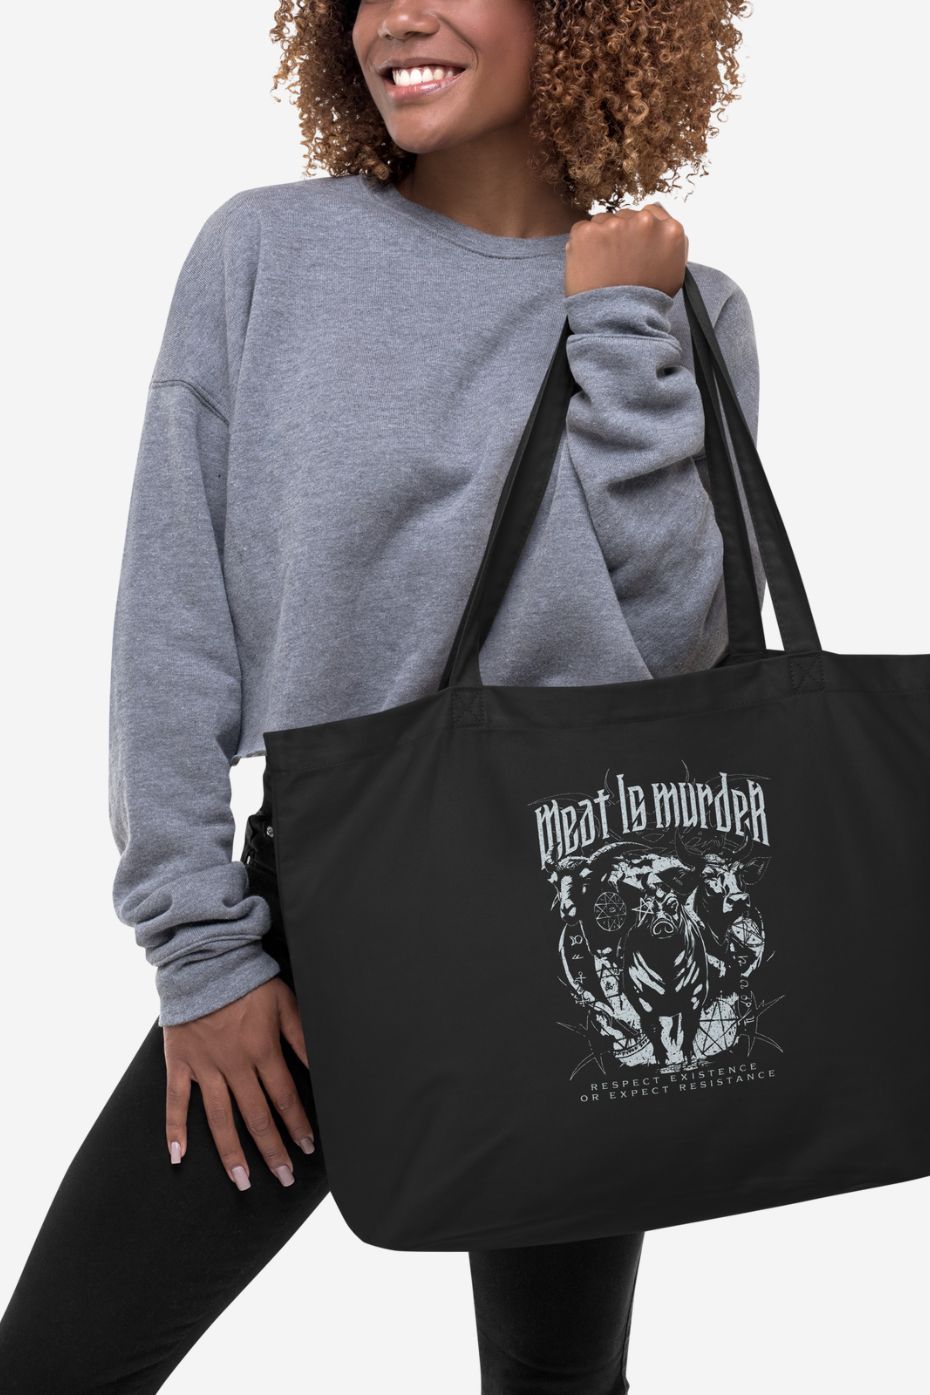 Meat is Murder - Large organic tote bag